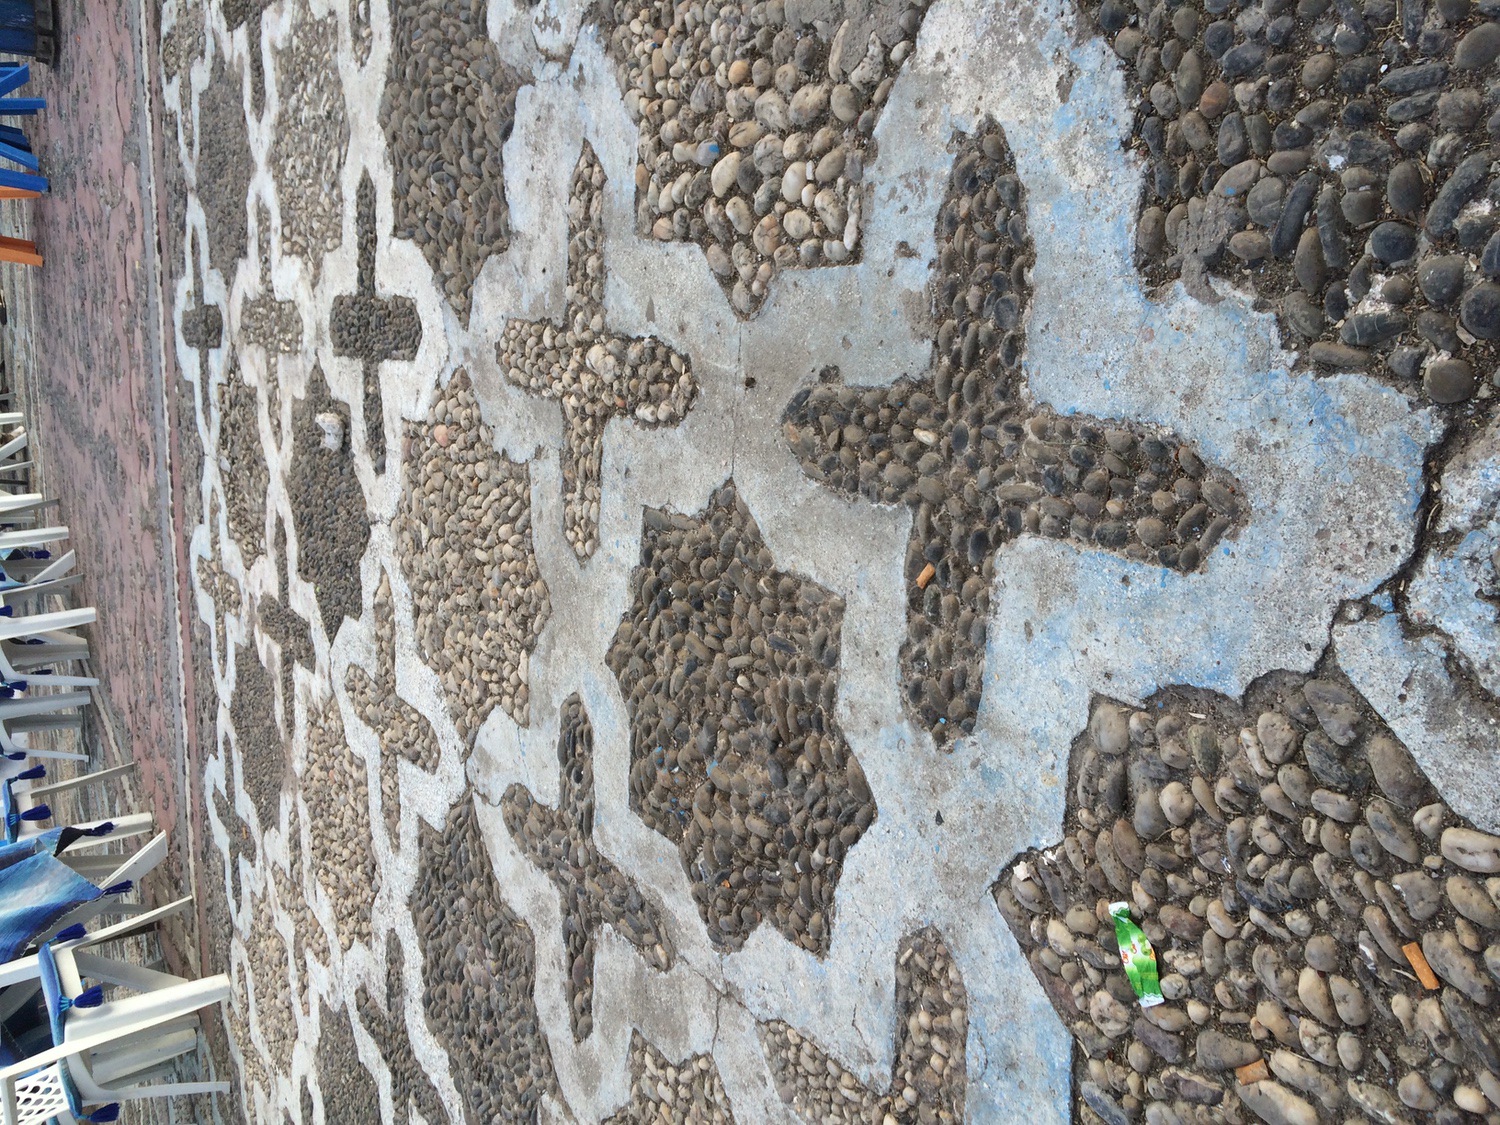 View of the 8-pointed star and cross, rough stone and mortar mosaic pattern paving the square